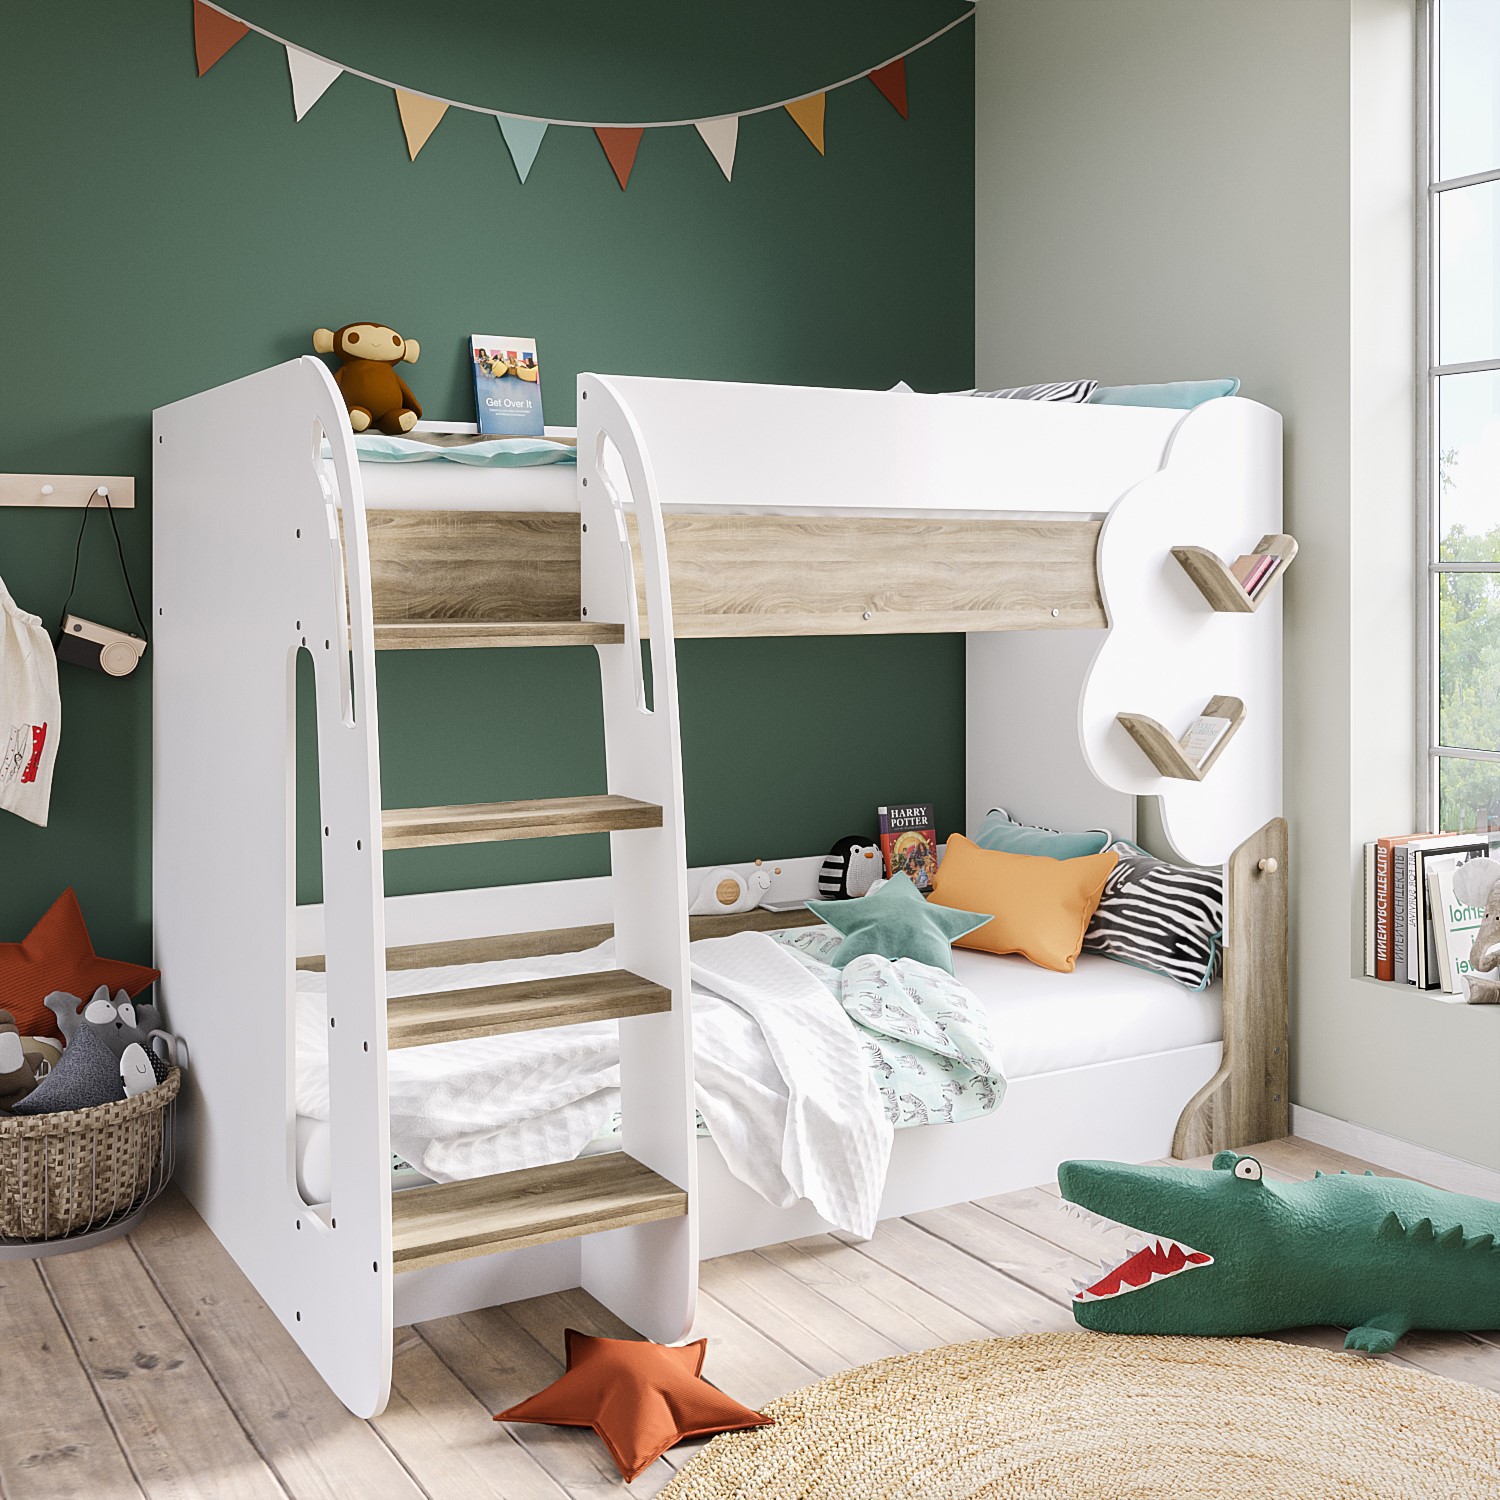 Photo of White and oak tree bunk bed with shelves - hadley